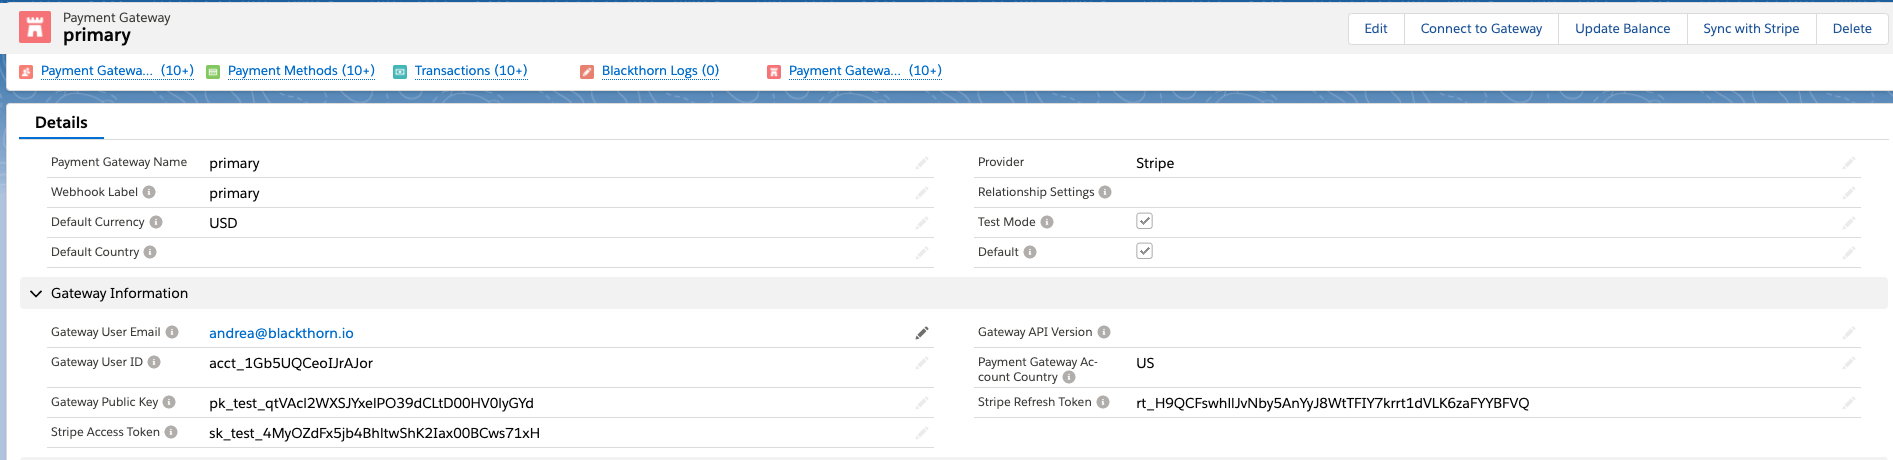 H_01_07_first payment gateway record